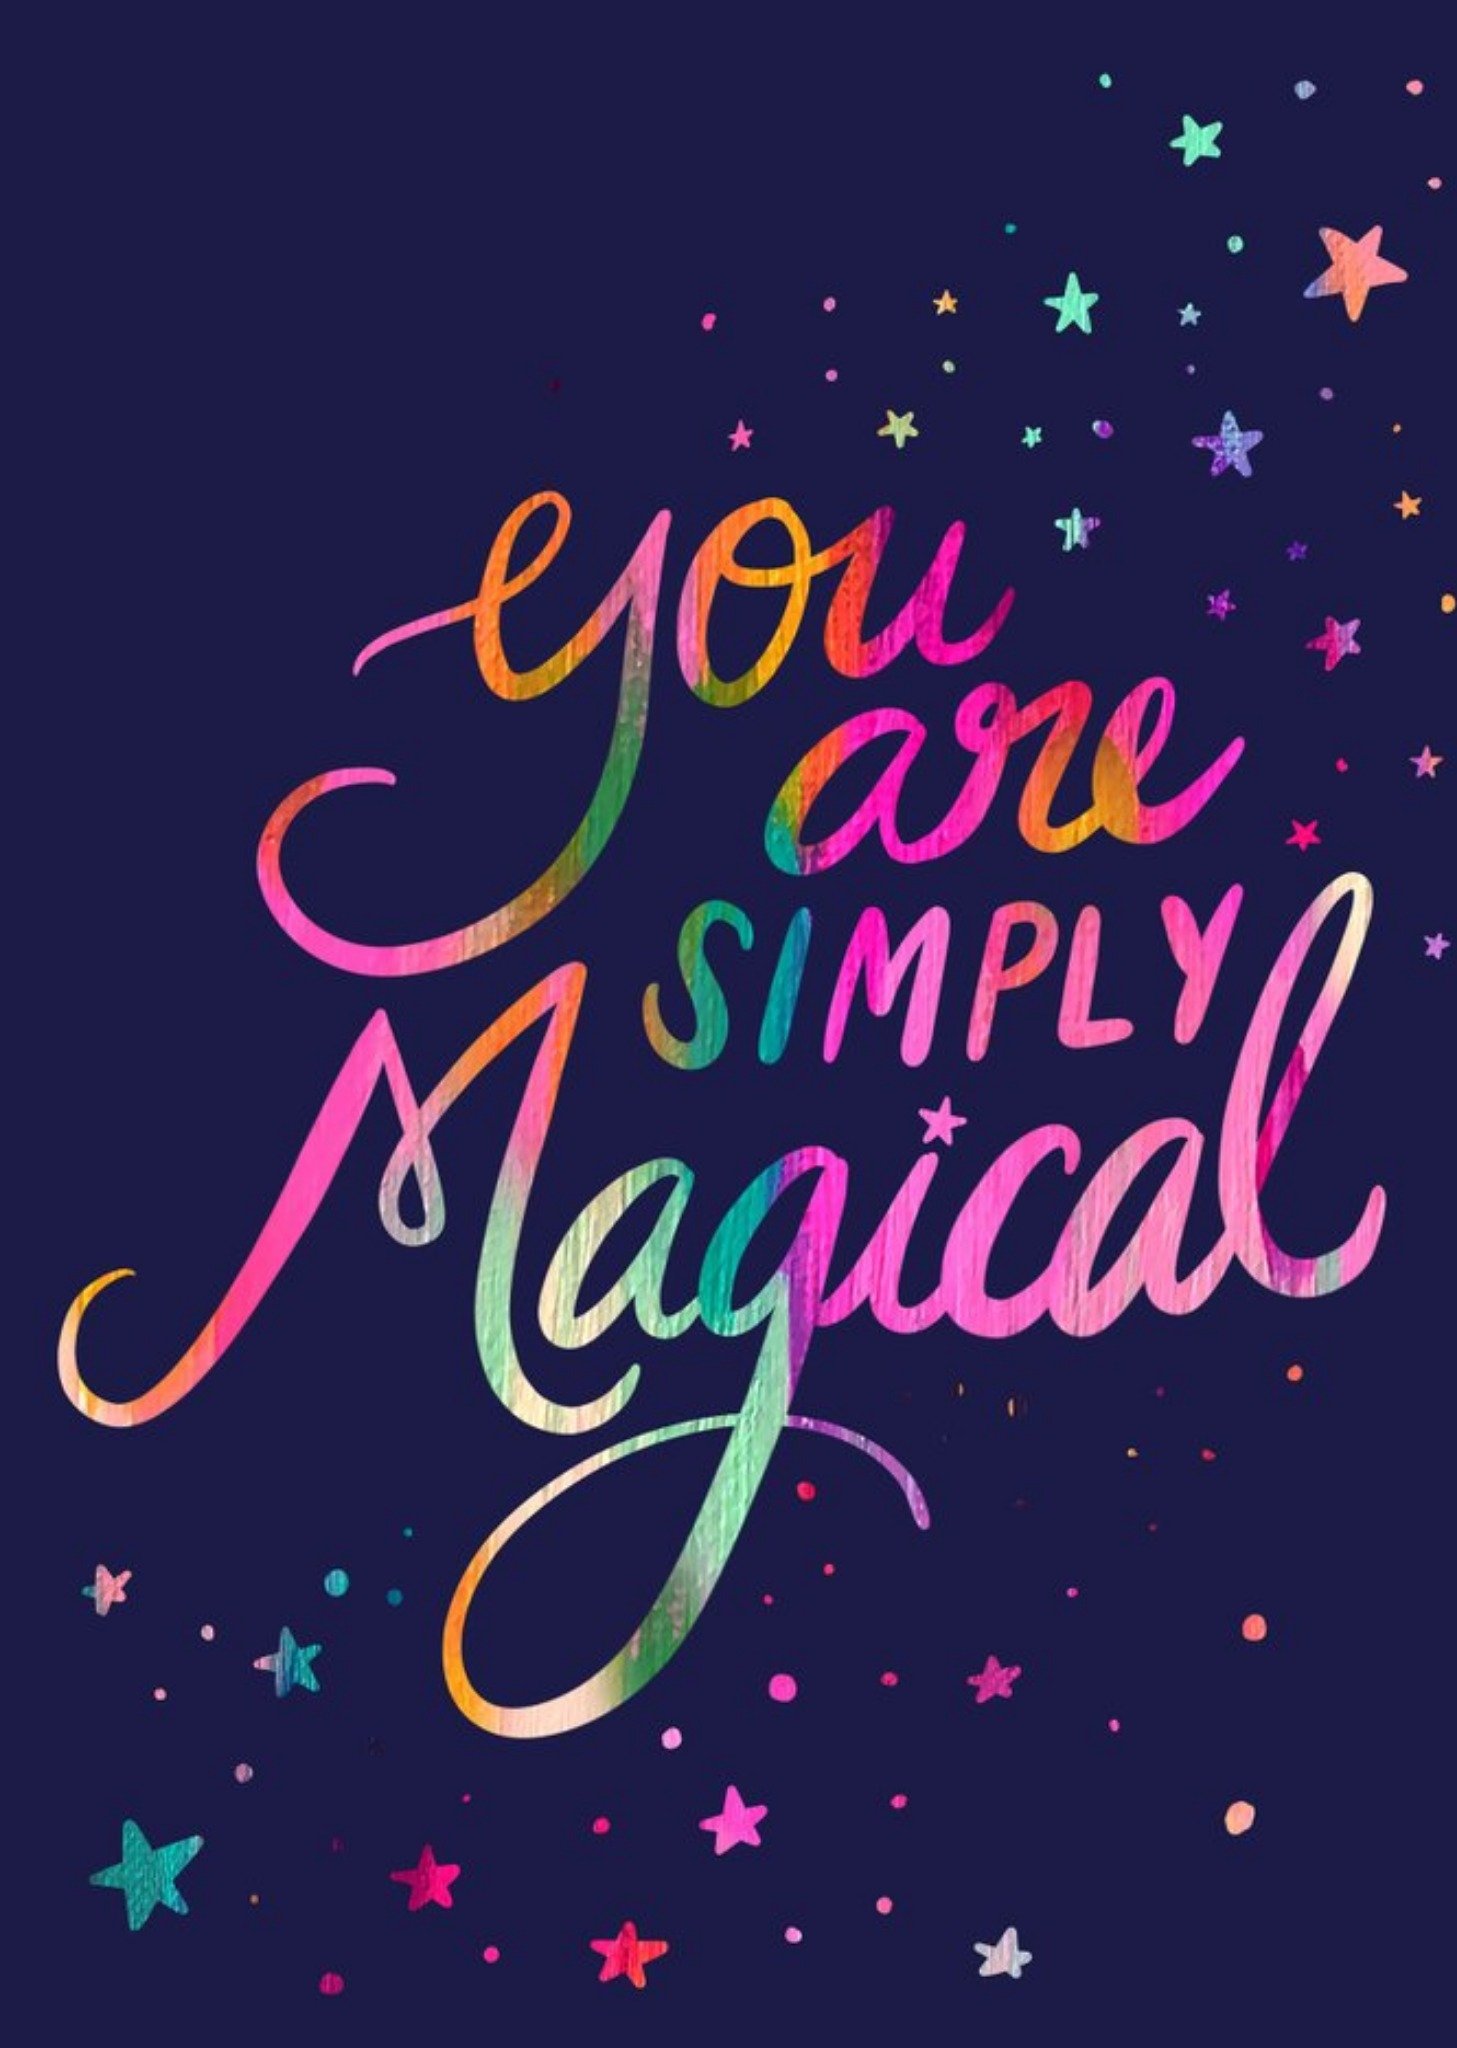 Moonpig Colourful Typography Surrounded By Stars You Are Simply Magical Card Ecard